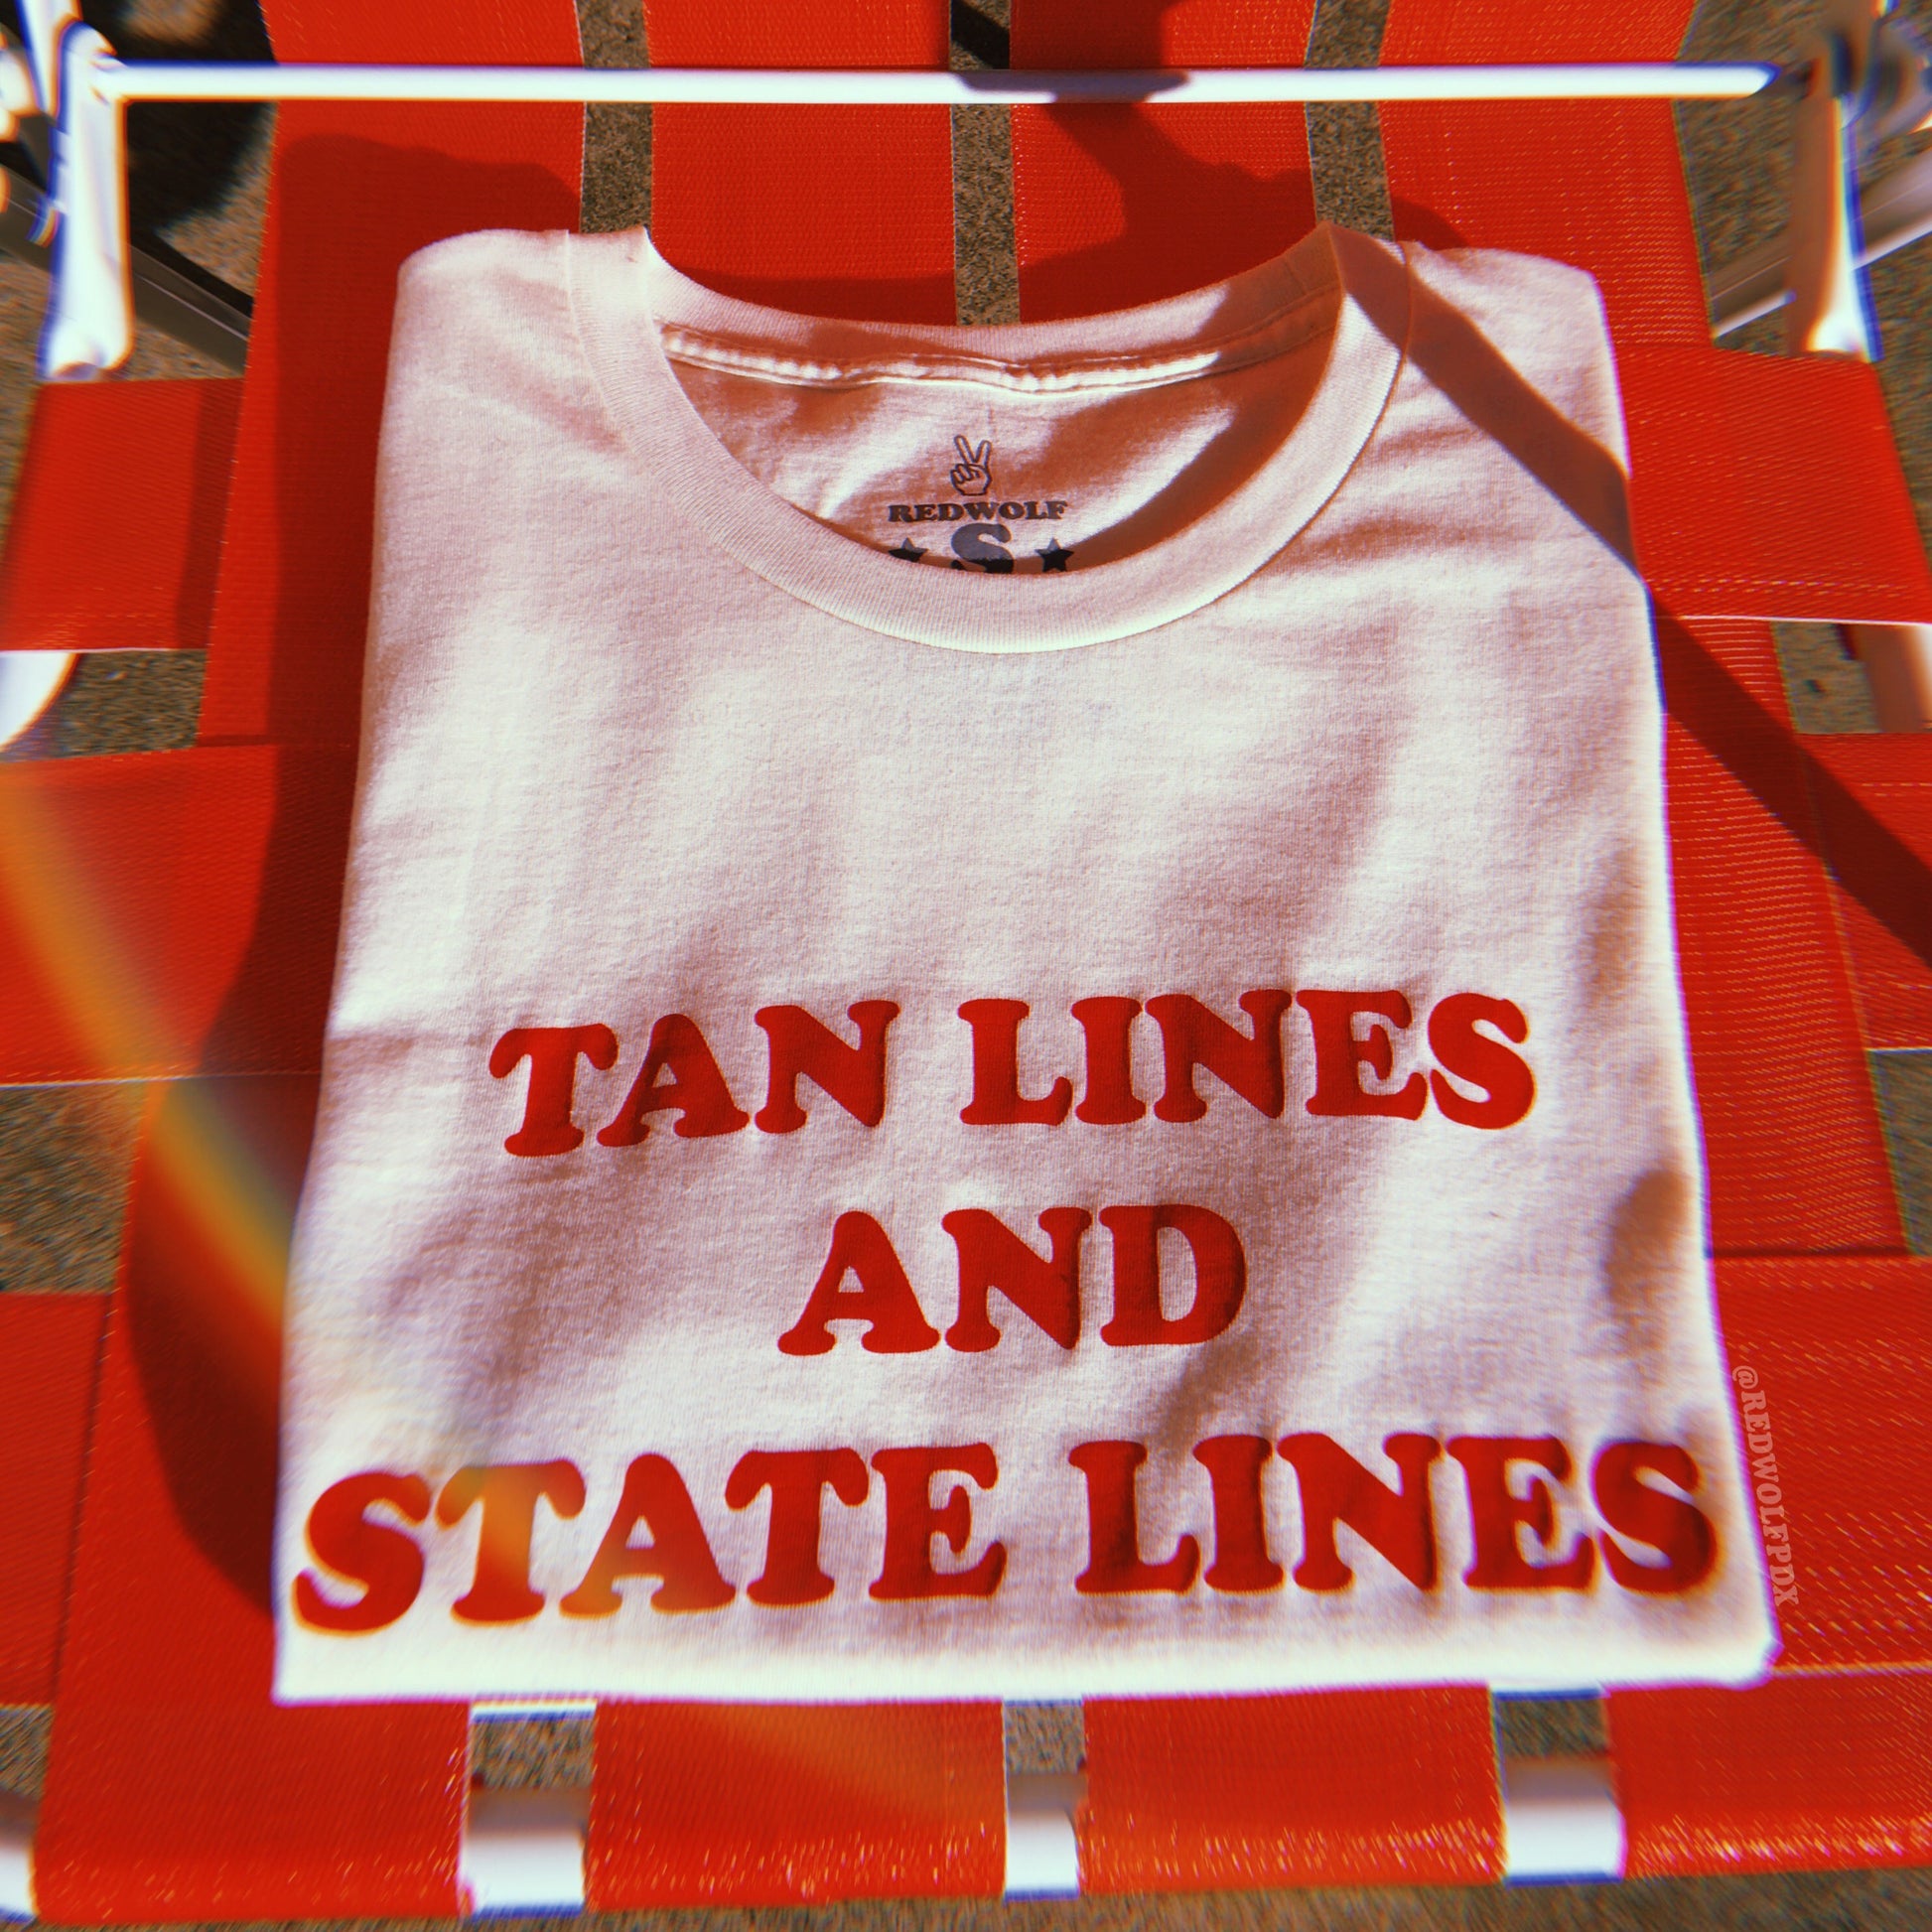   - Tan Lines and State Lines Tee - REDWOLF